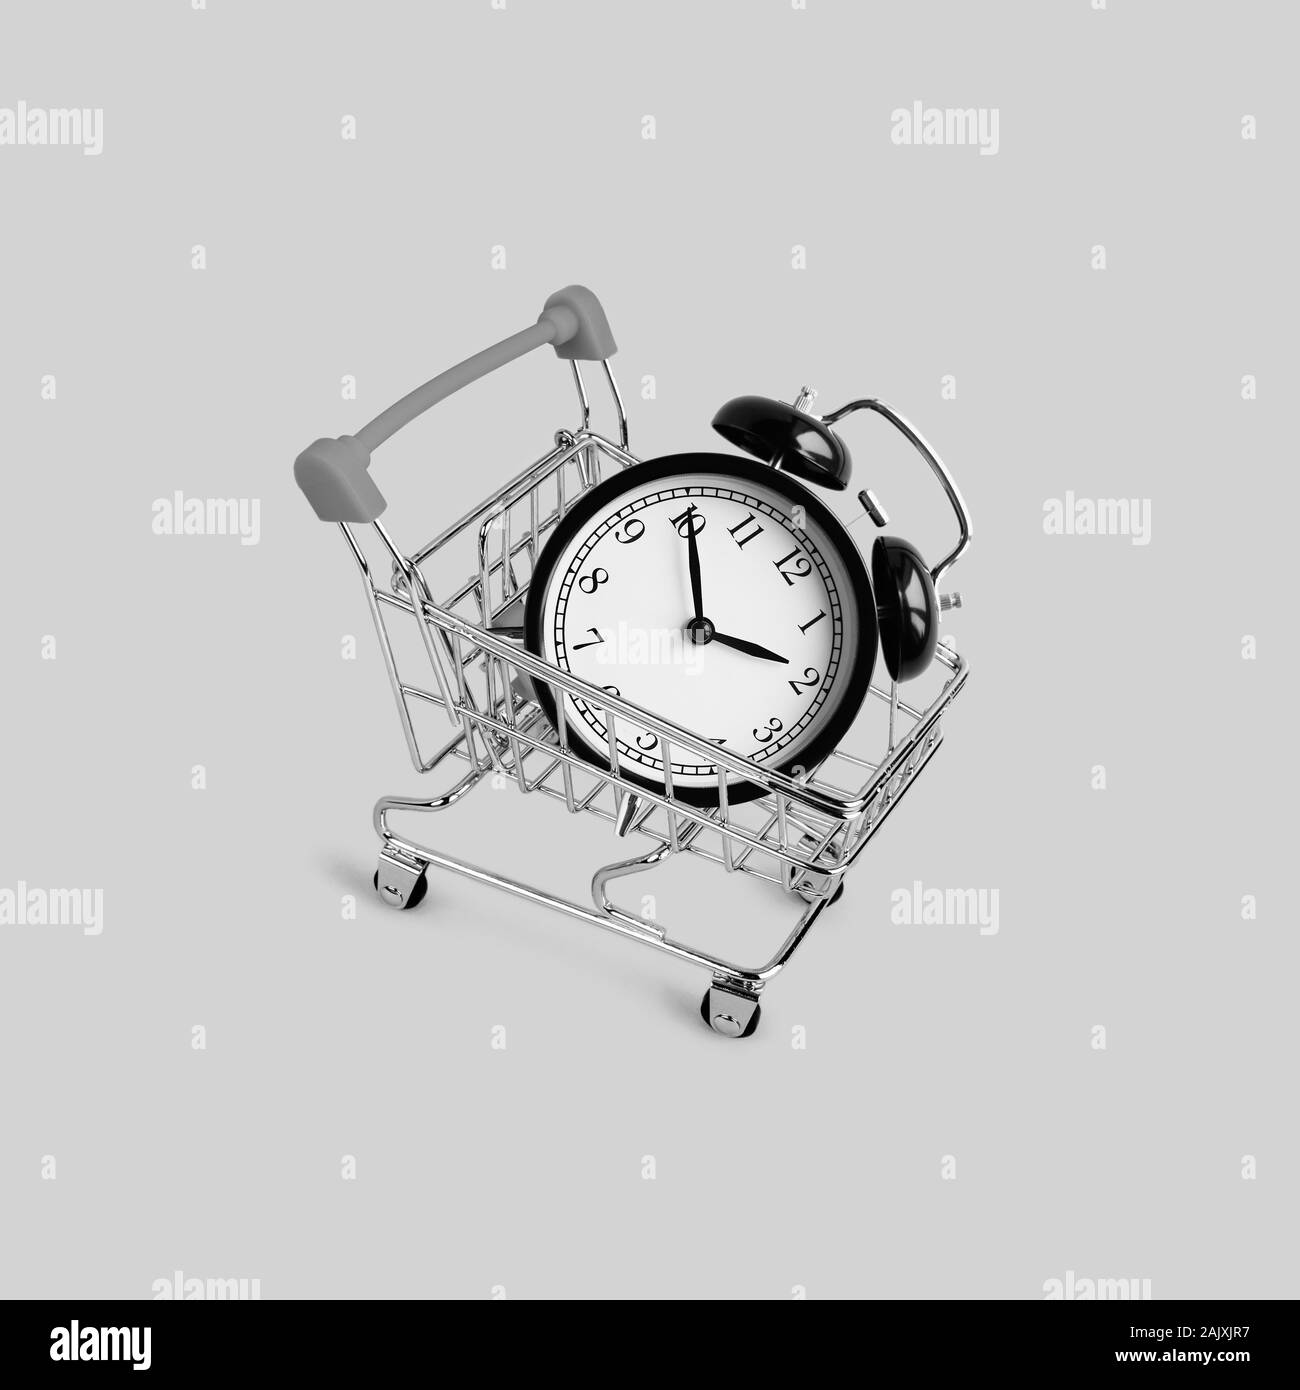 Shopping cart and black classic style alarm clock. New Year and start up concept. Grocery shopping and sale concept. Black friday, online shopping and Stock Photo